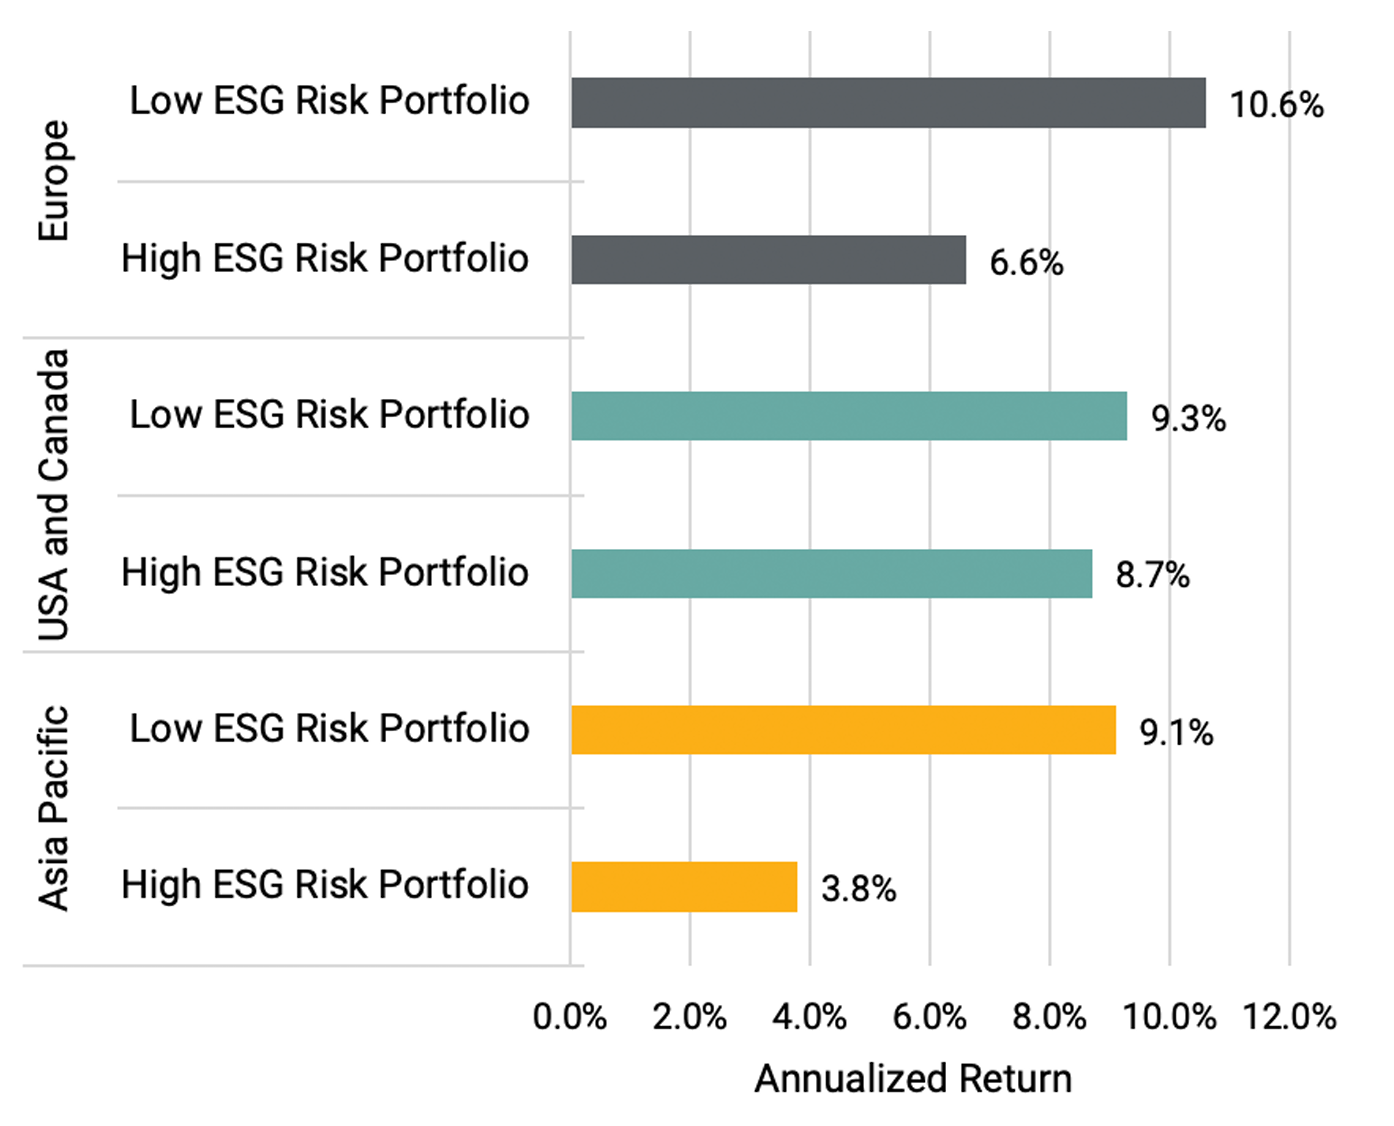 Bar chart showing annualized returns for low-ESG-risk portfolios and high-ESG-risk portfolios in Europe, the USA and Canada, and Asia Pacific.